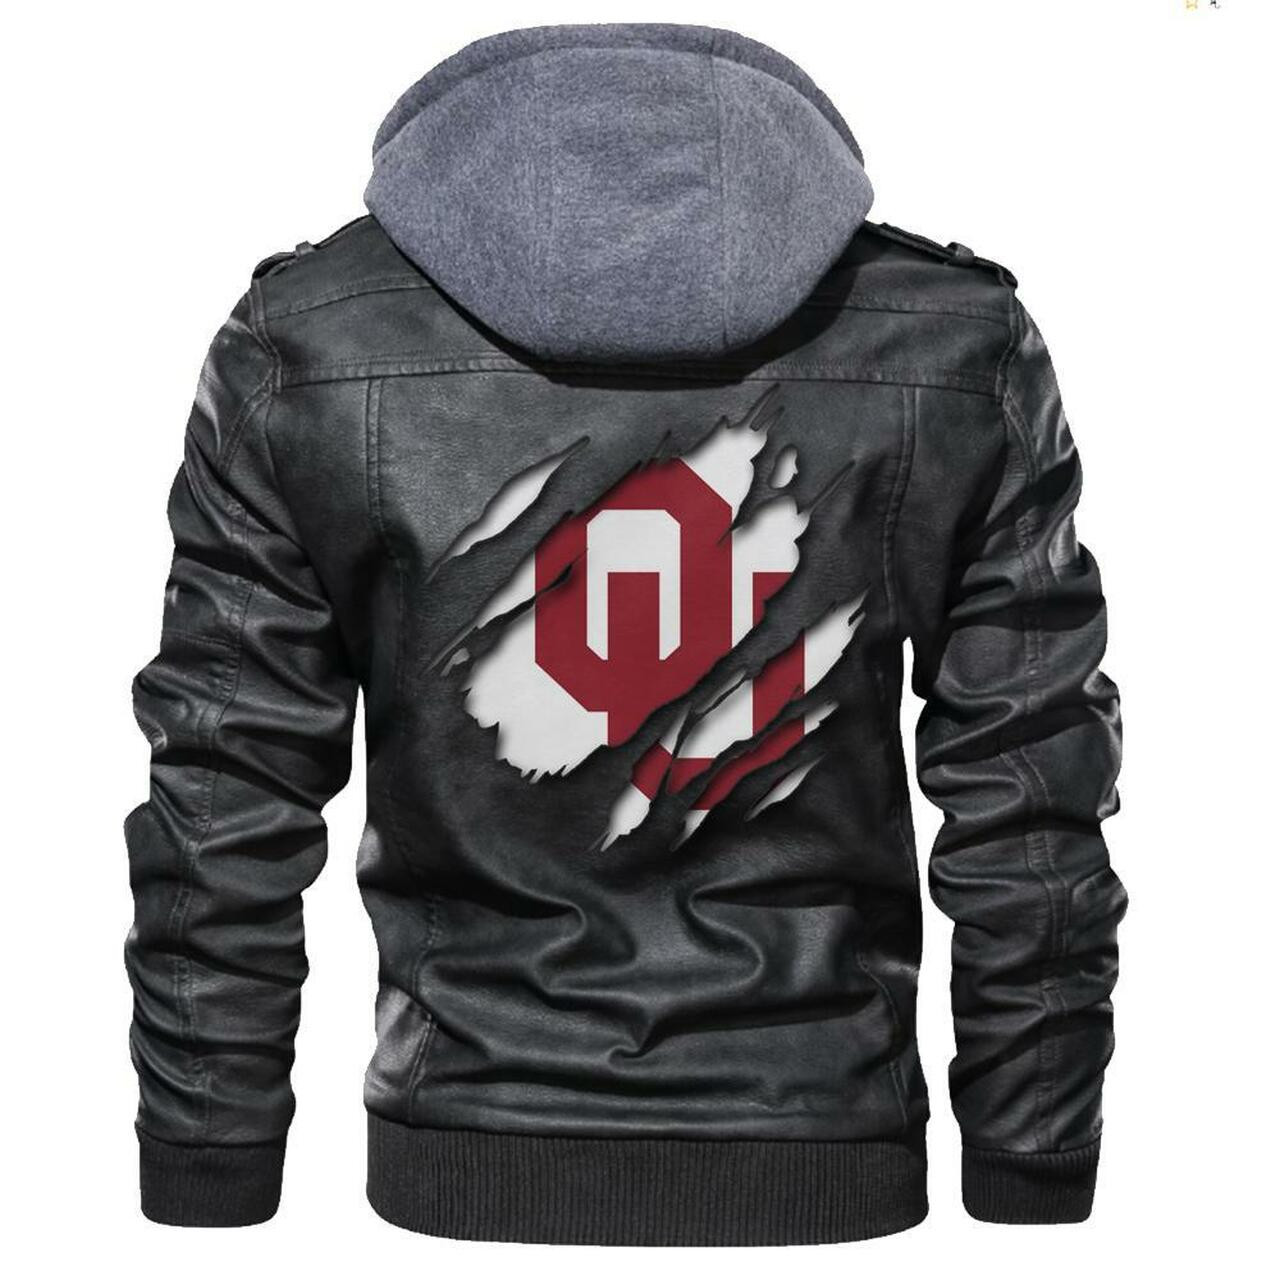 This leather Jacket will look great on you and make you stand out from the crowd 229